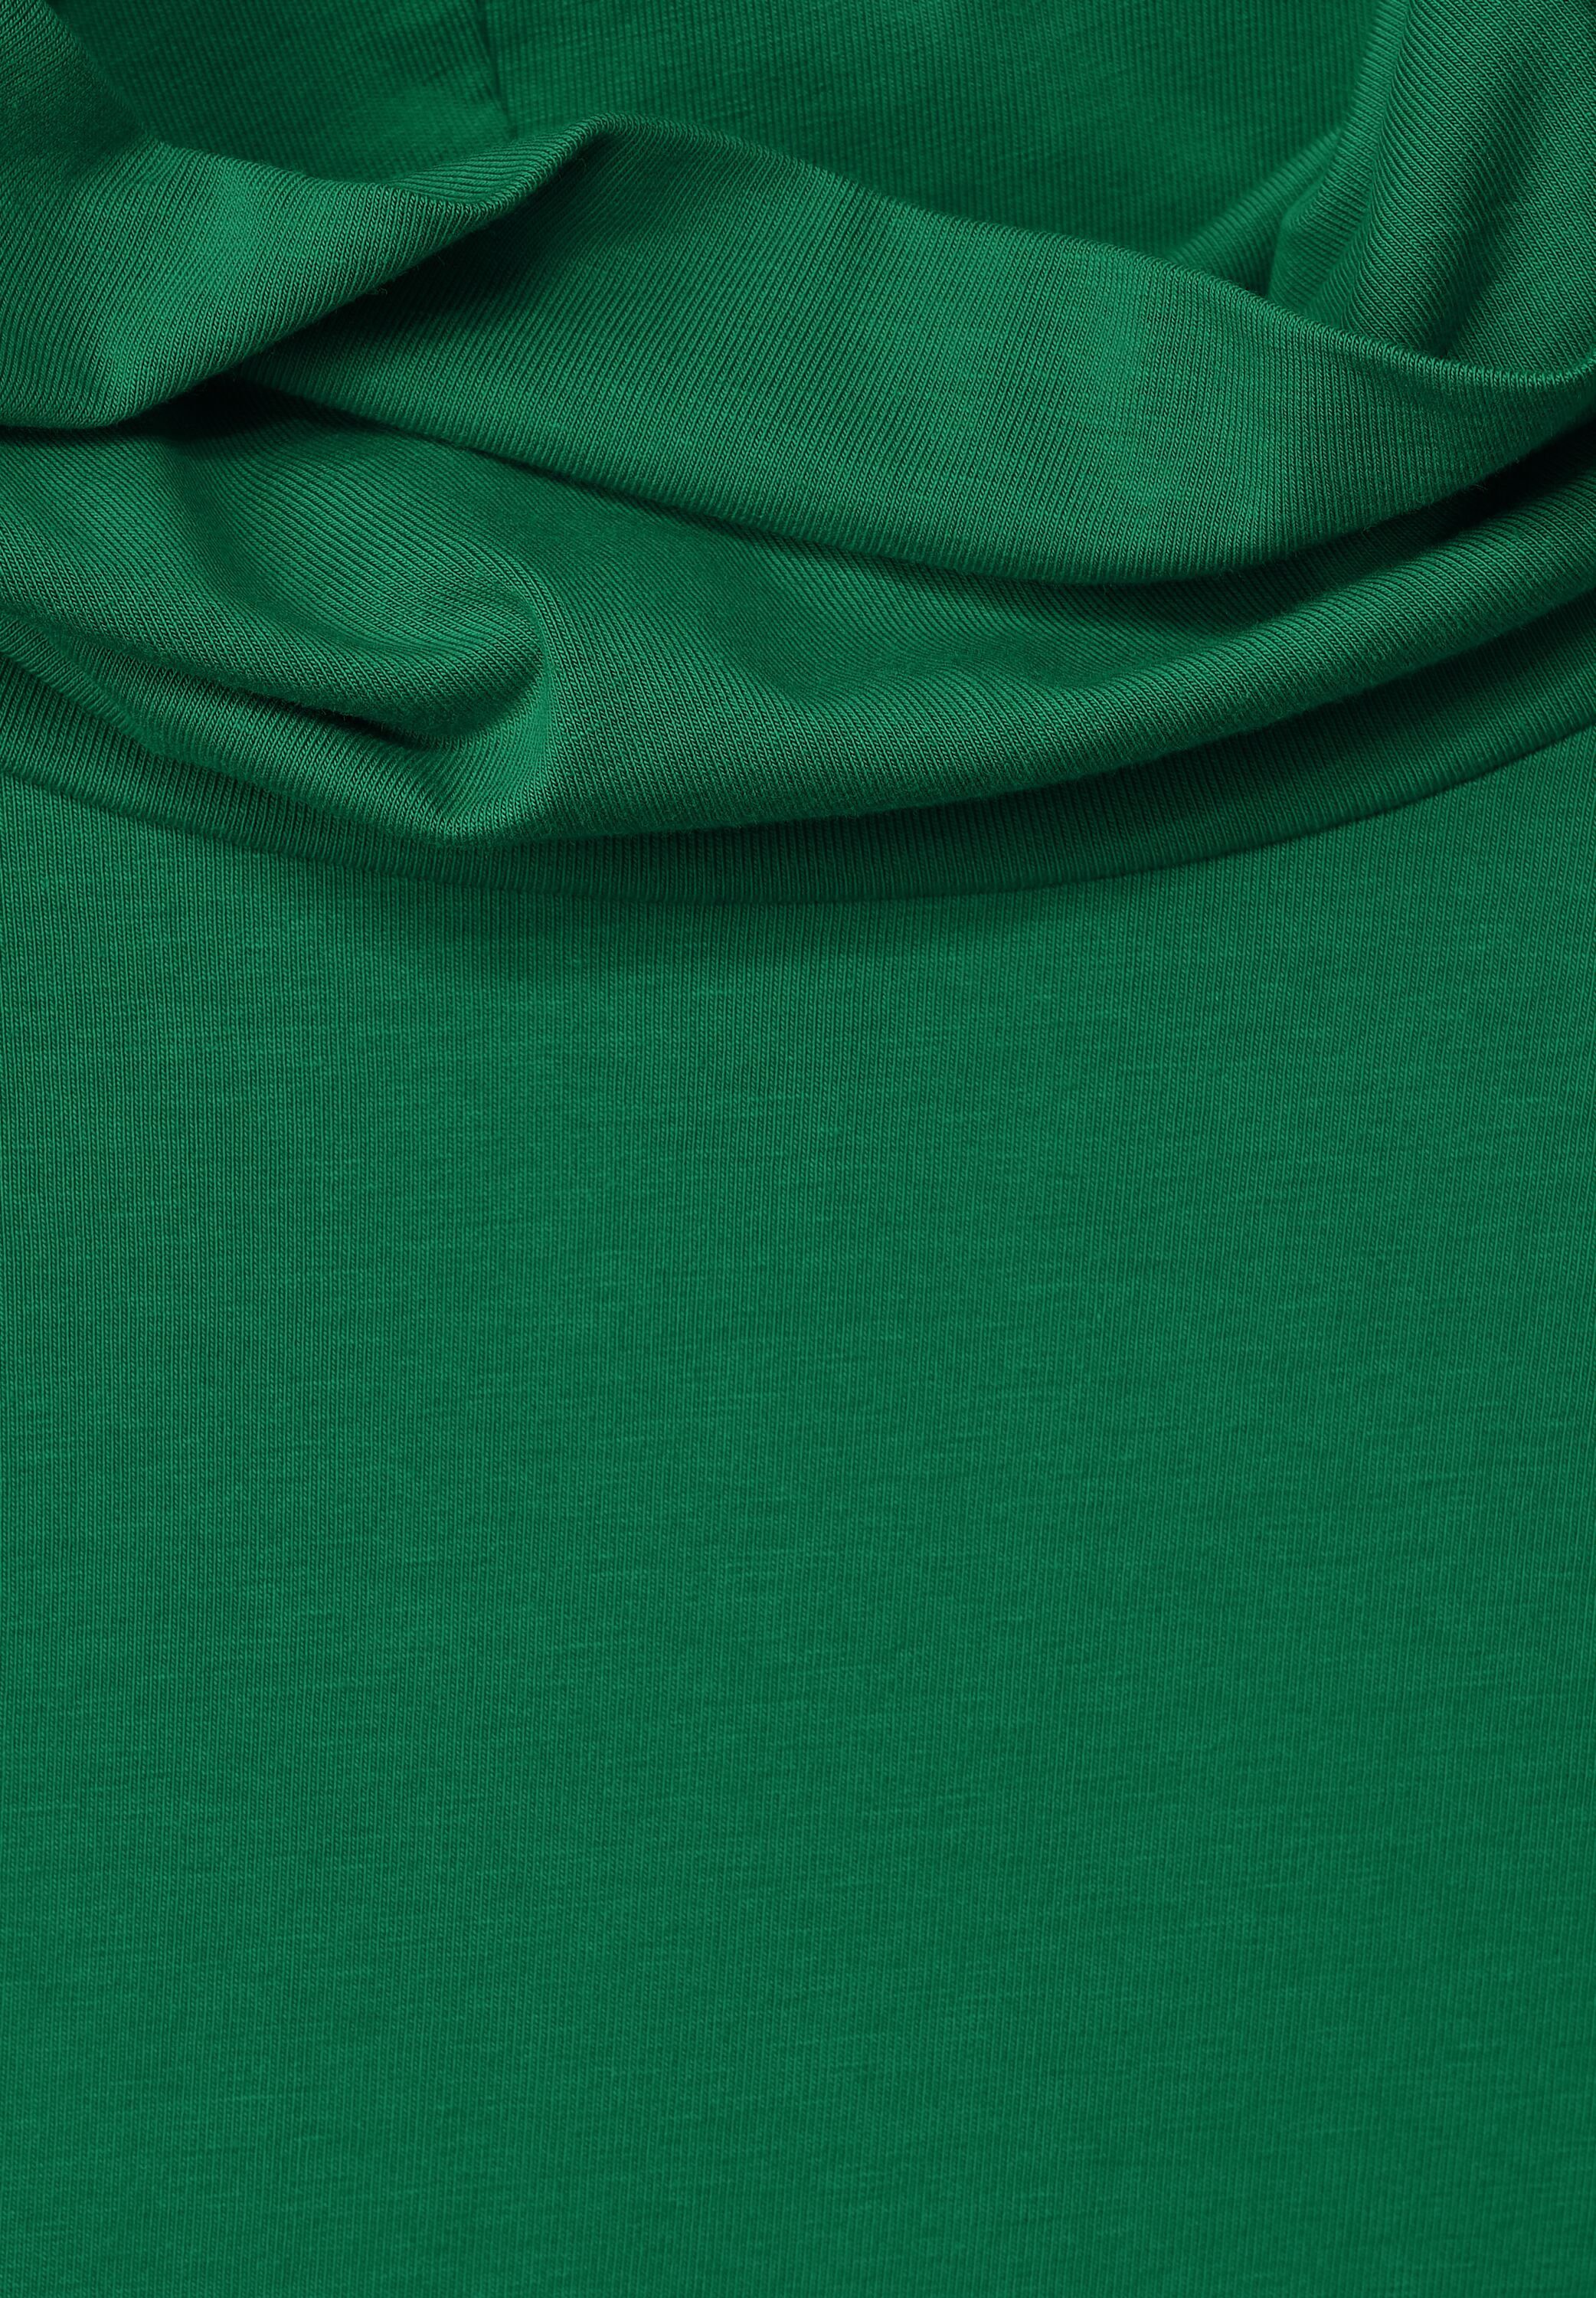 Cecil T-Shirt in Unifarbe easy green